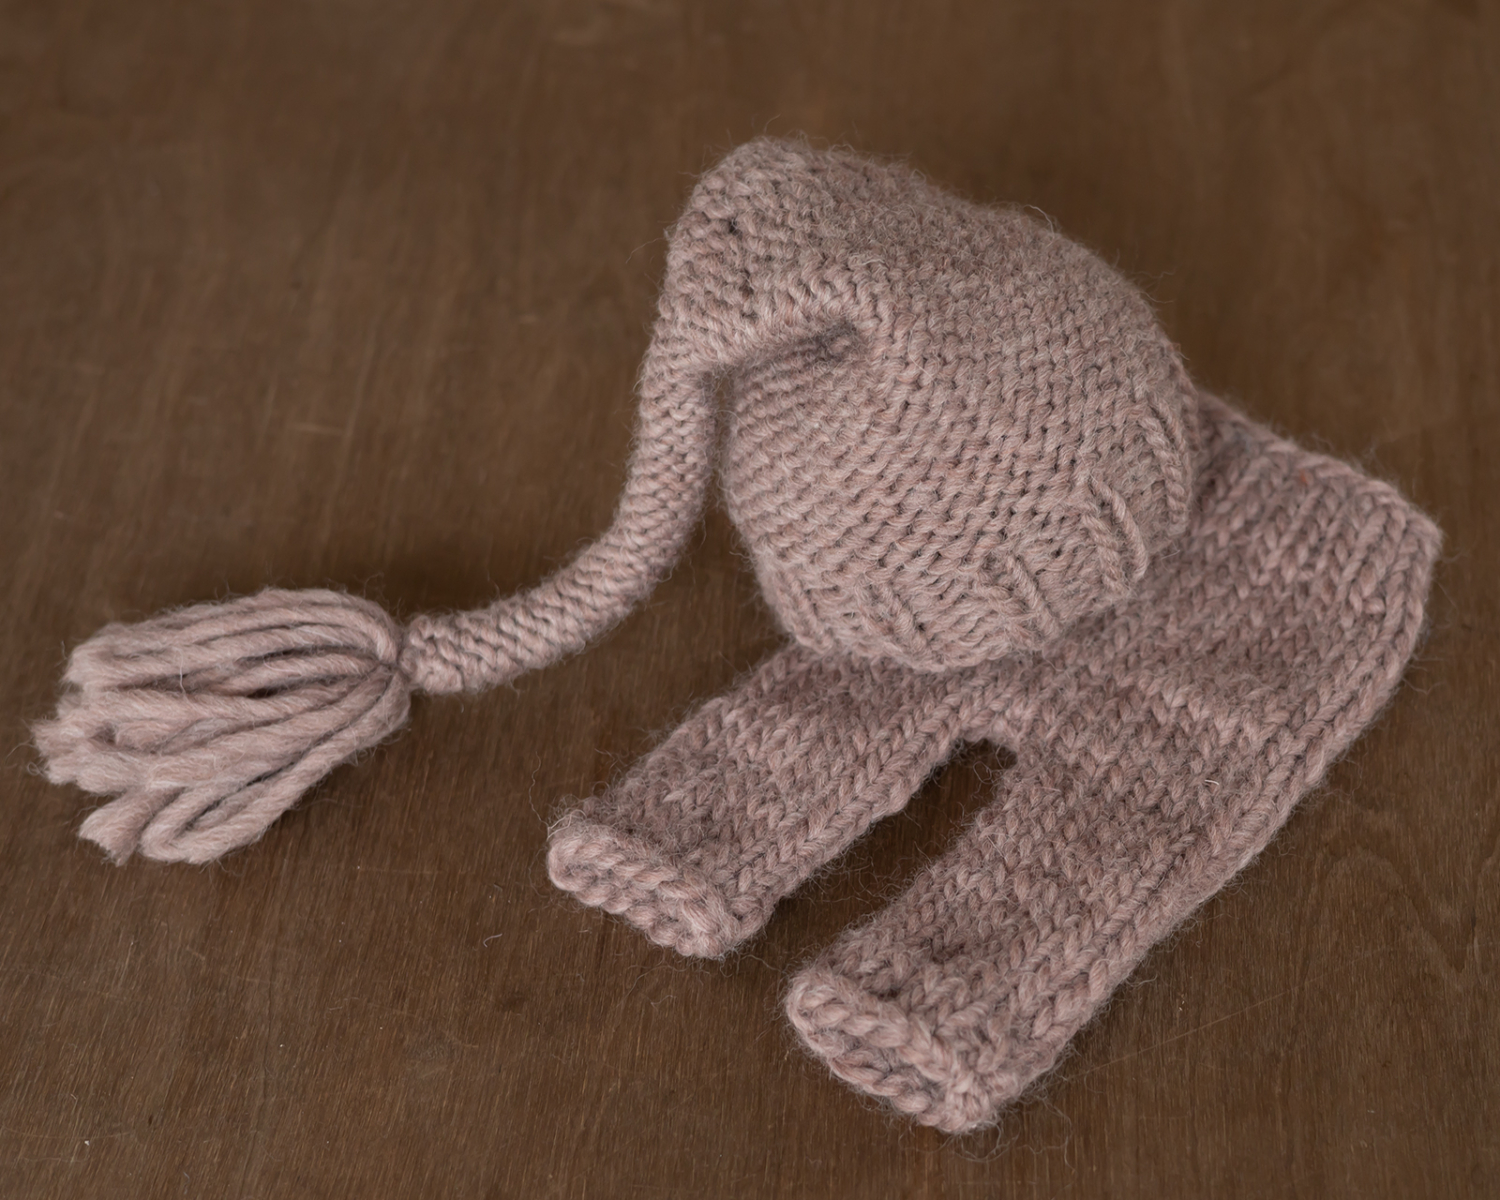 Beige Newborn Set: Pants and Sleapy Hat